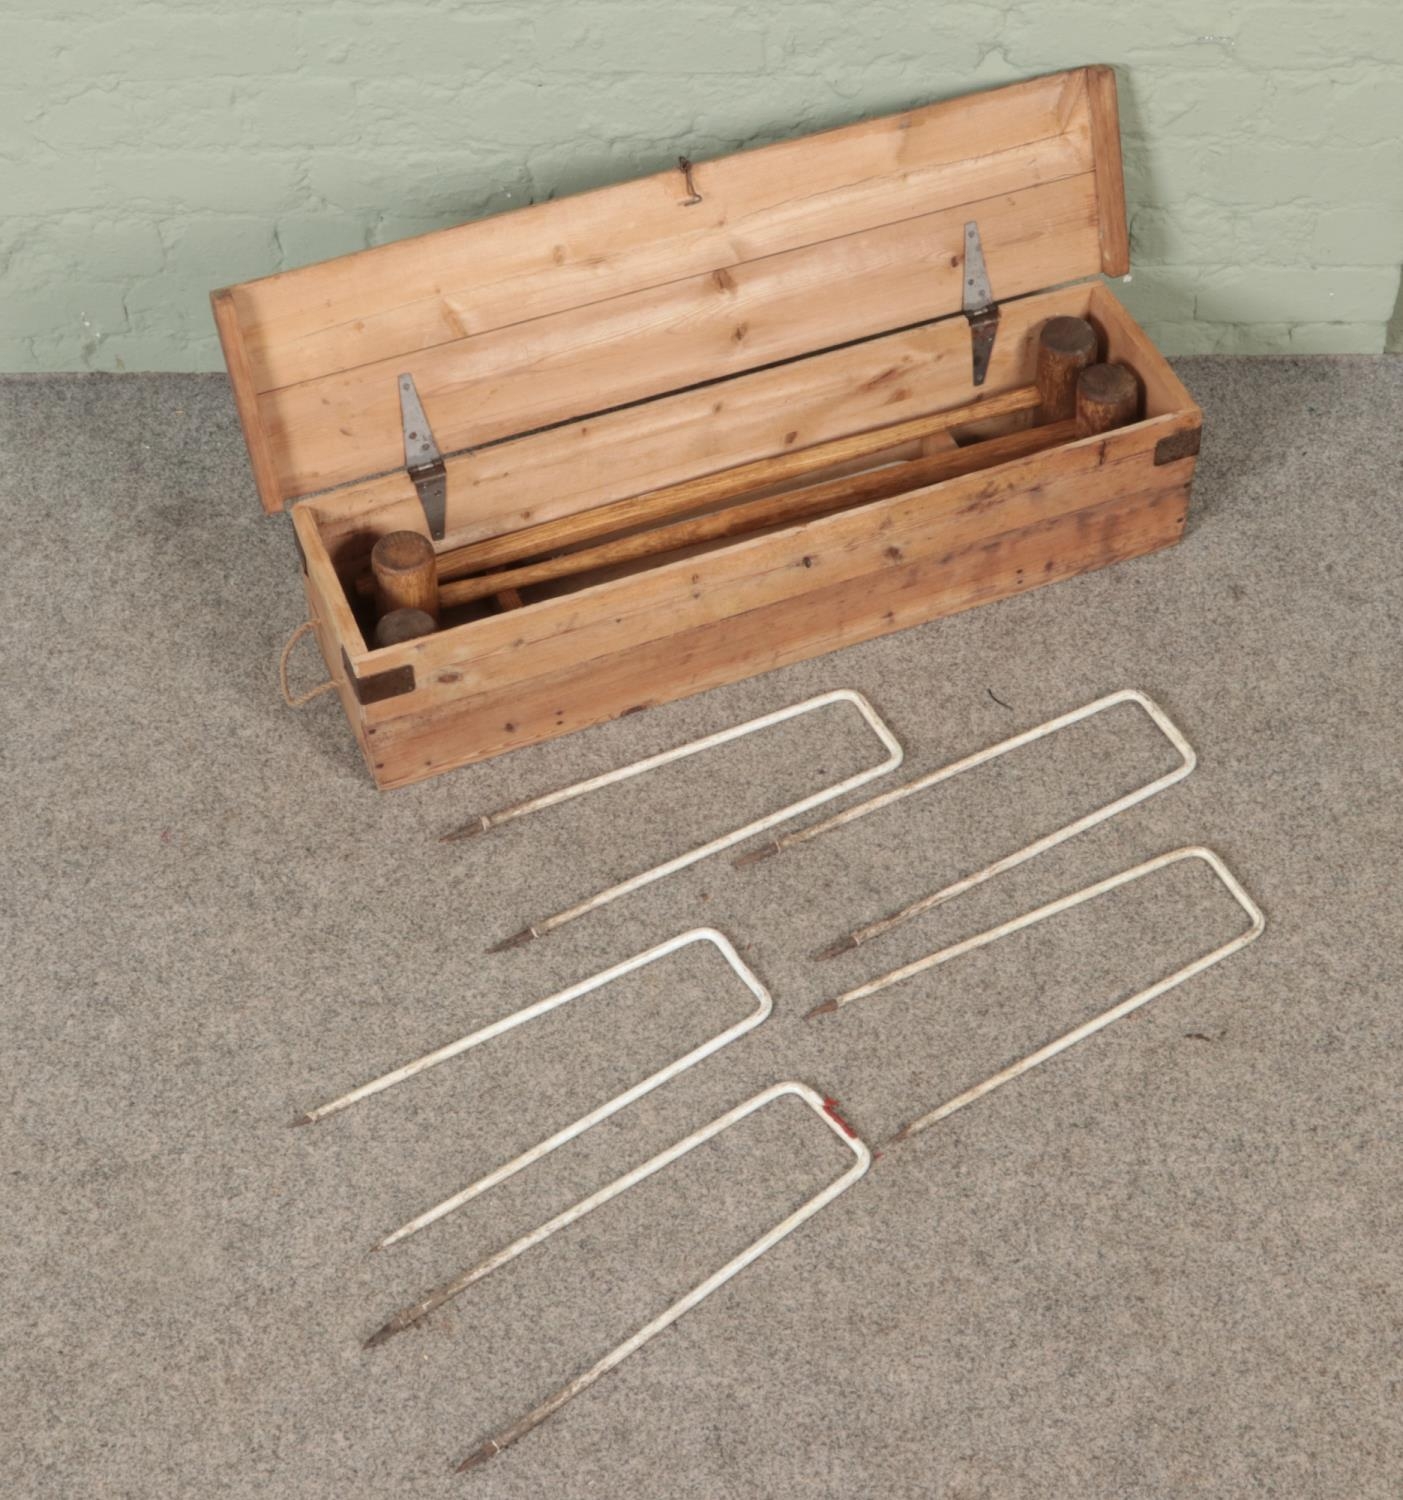 A vintage Croquet set with fitted wooden case. Missing balls.